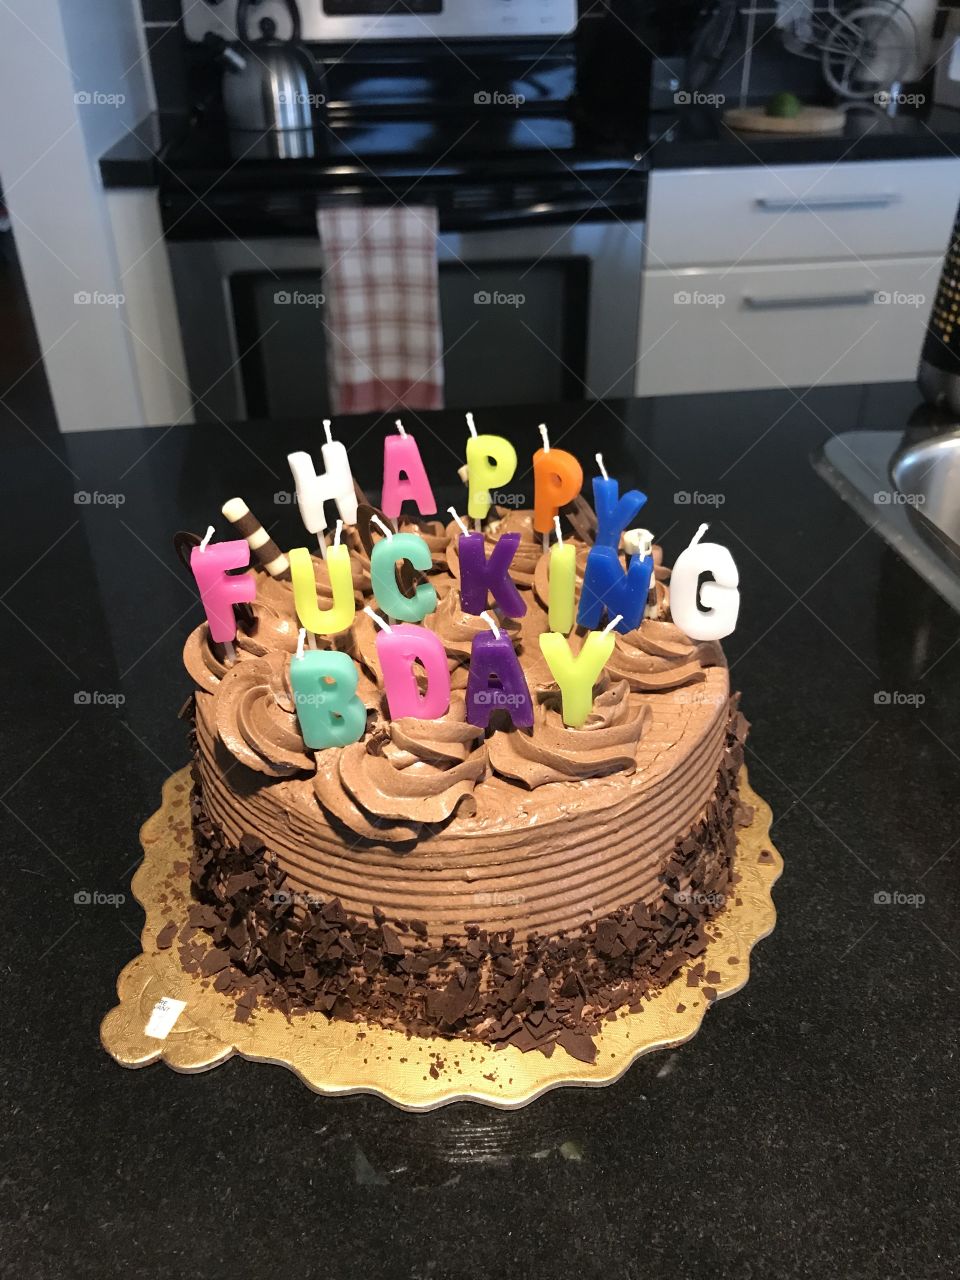 Happy Fucking Birthday cake from my family for my birthday this year! 